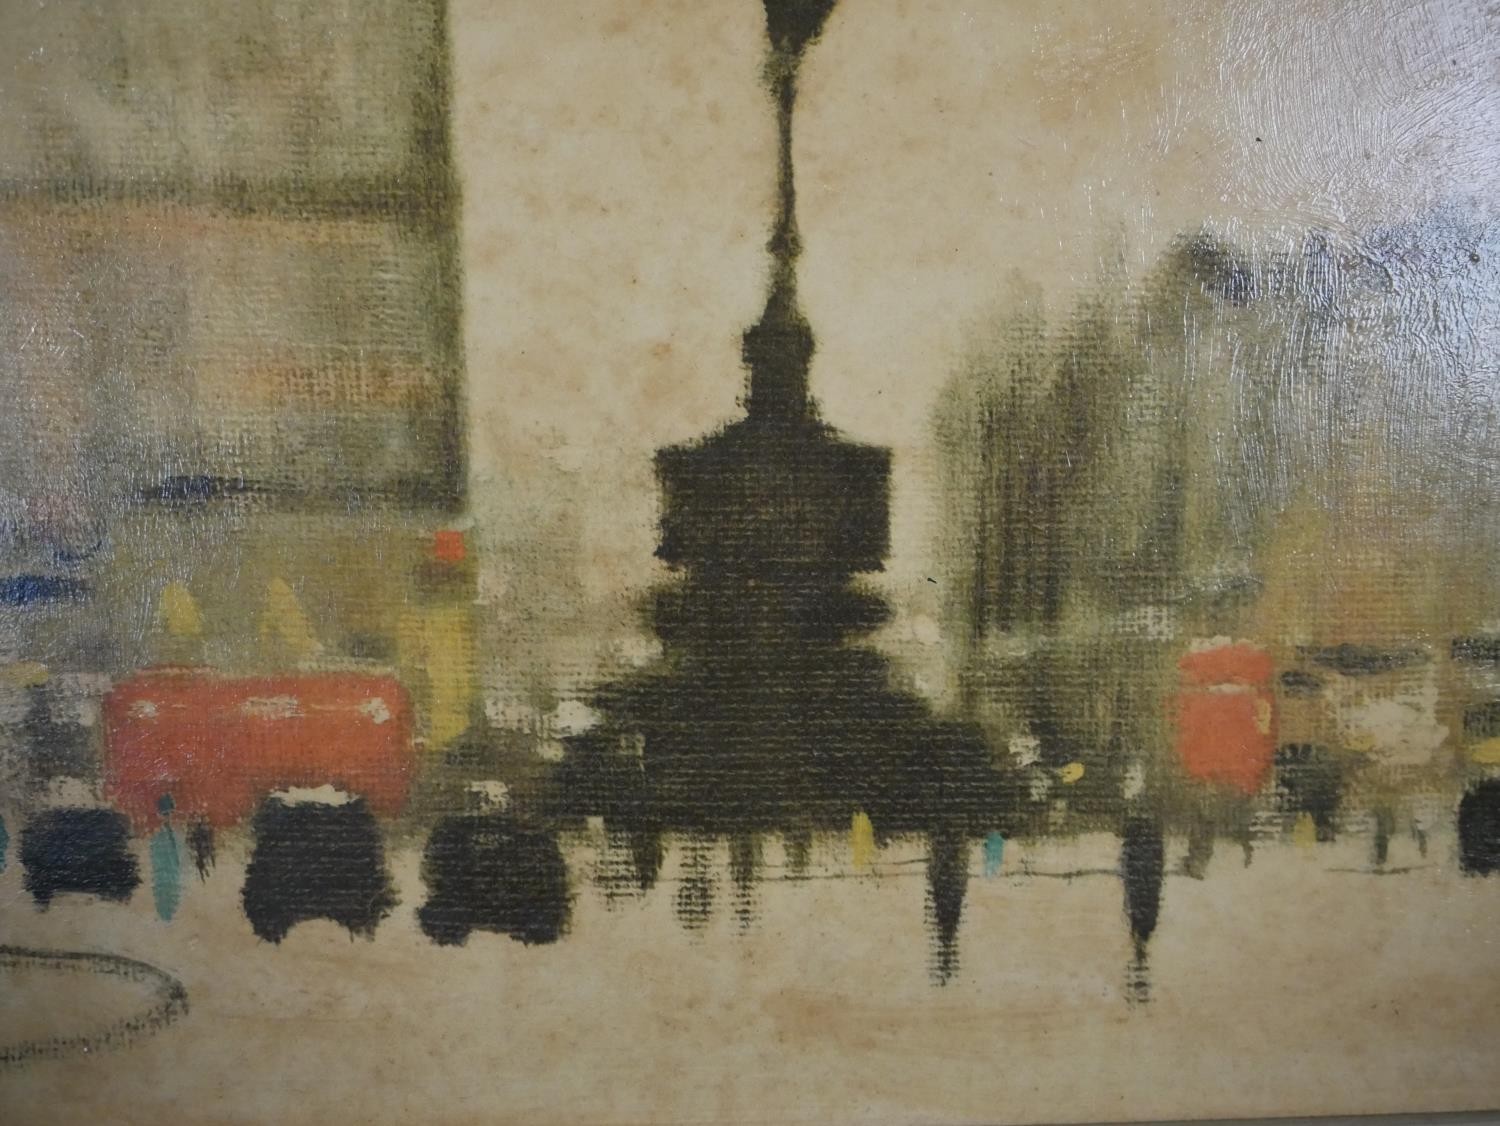 Tony Robert (Tony) Klitz (1917-2000), print of Piccadilly Circus oil on canvas, signed in plate